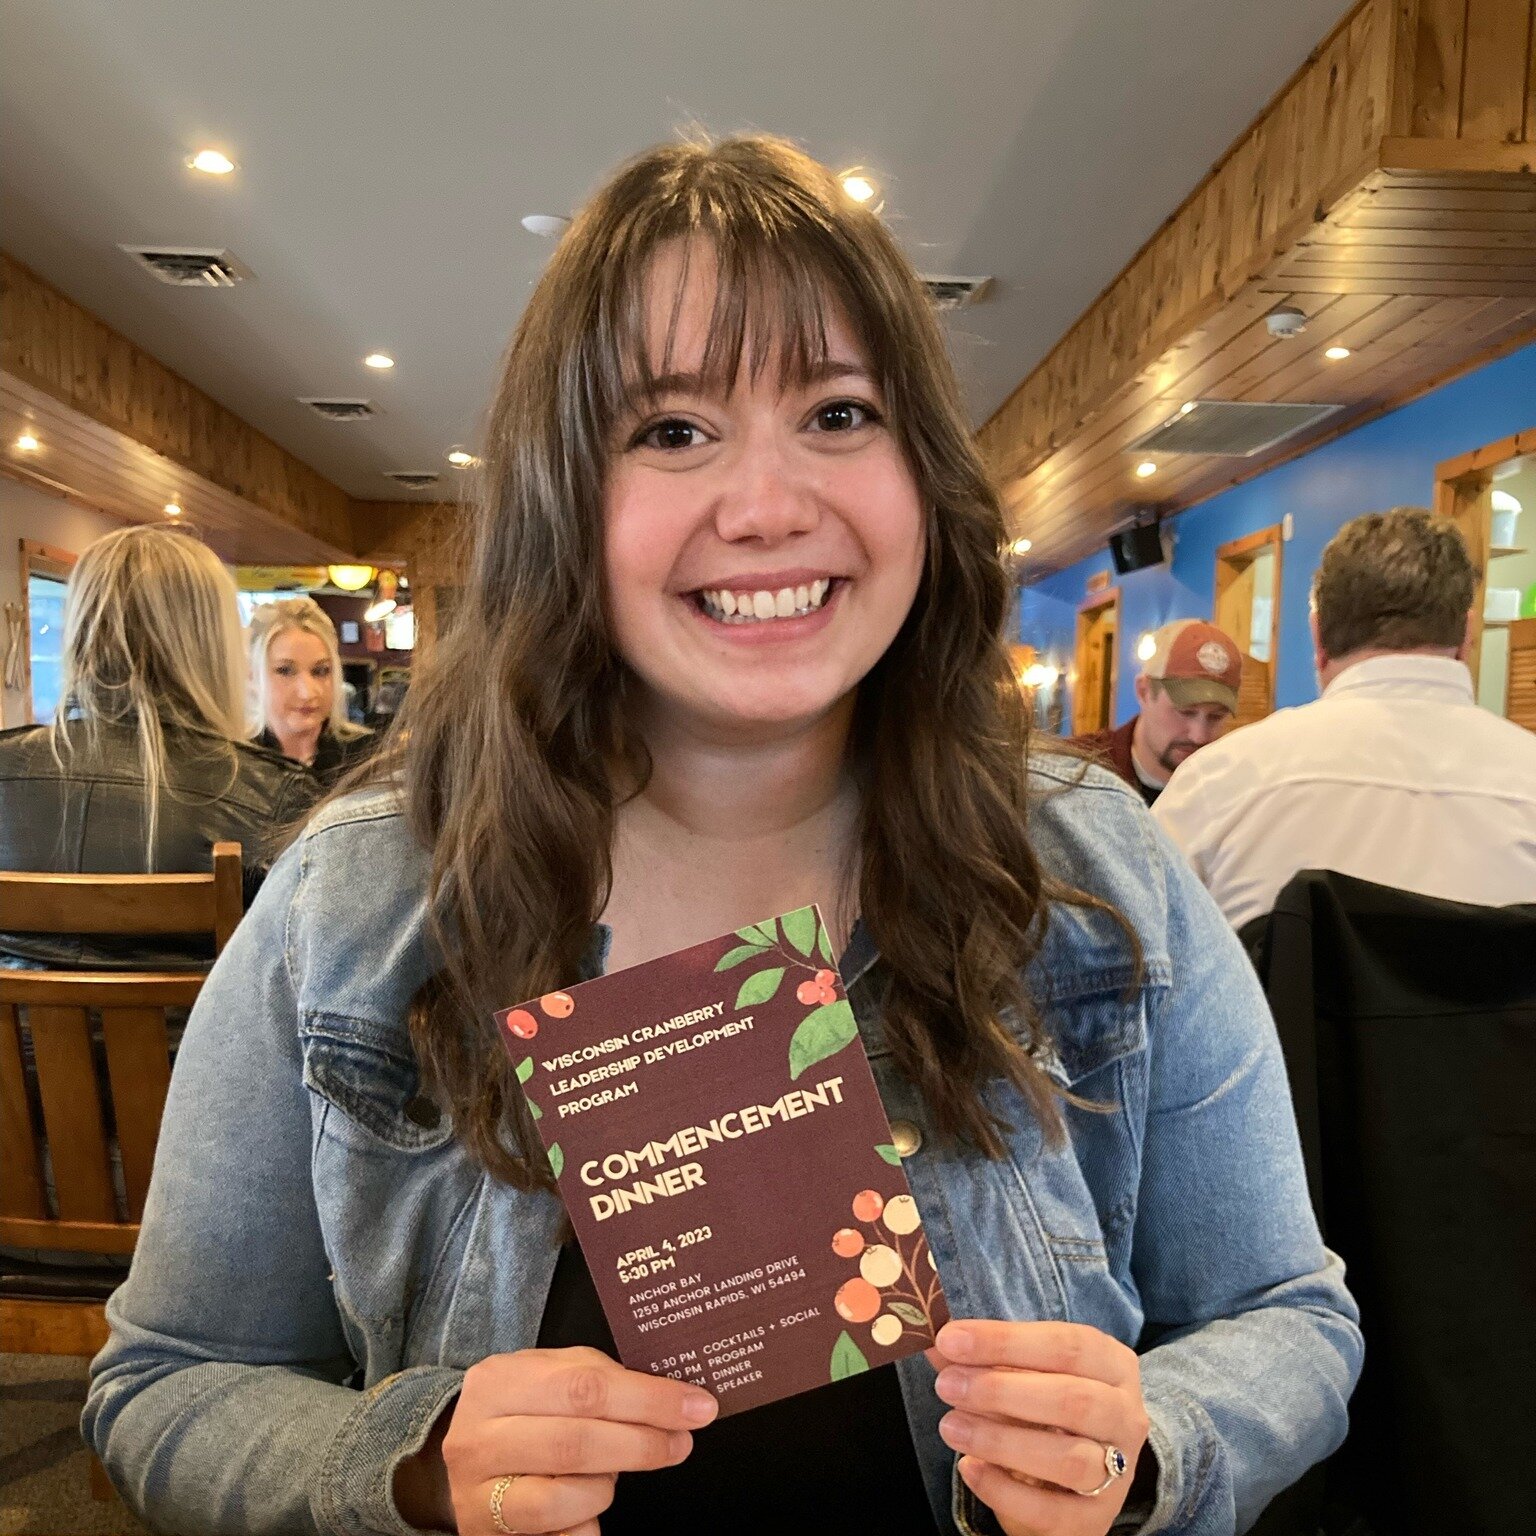 Congrats to our new grad 🎓
Our youngest, Sarah, just completed the Wisconsin State Cranberry Grower Association's Leadership Development Course! Sarah helps JLF with marketing, graphic design, sales &amp; social media from afar as she currently live